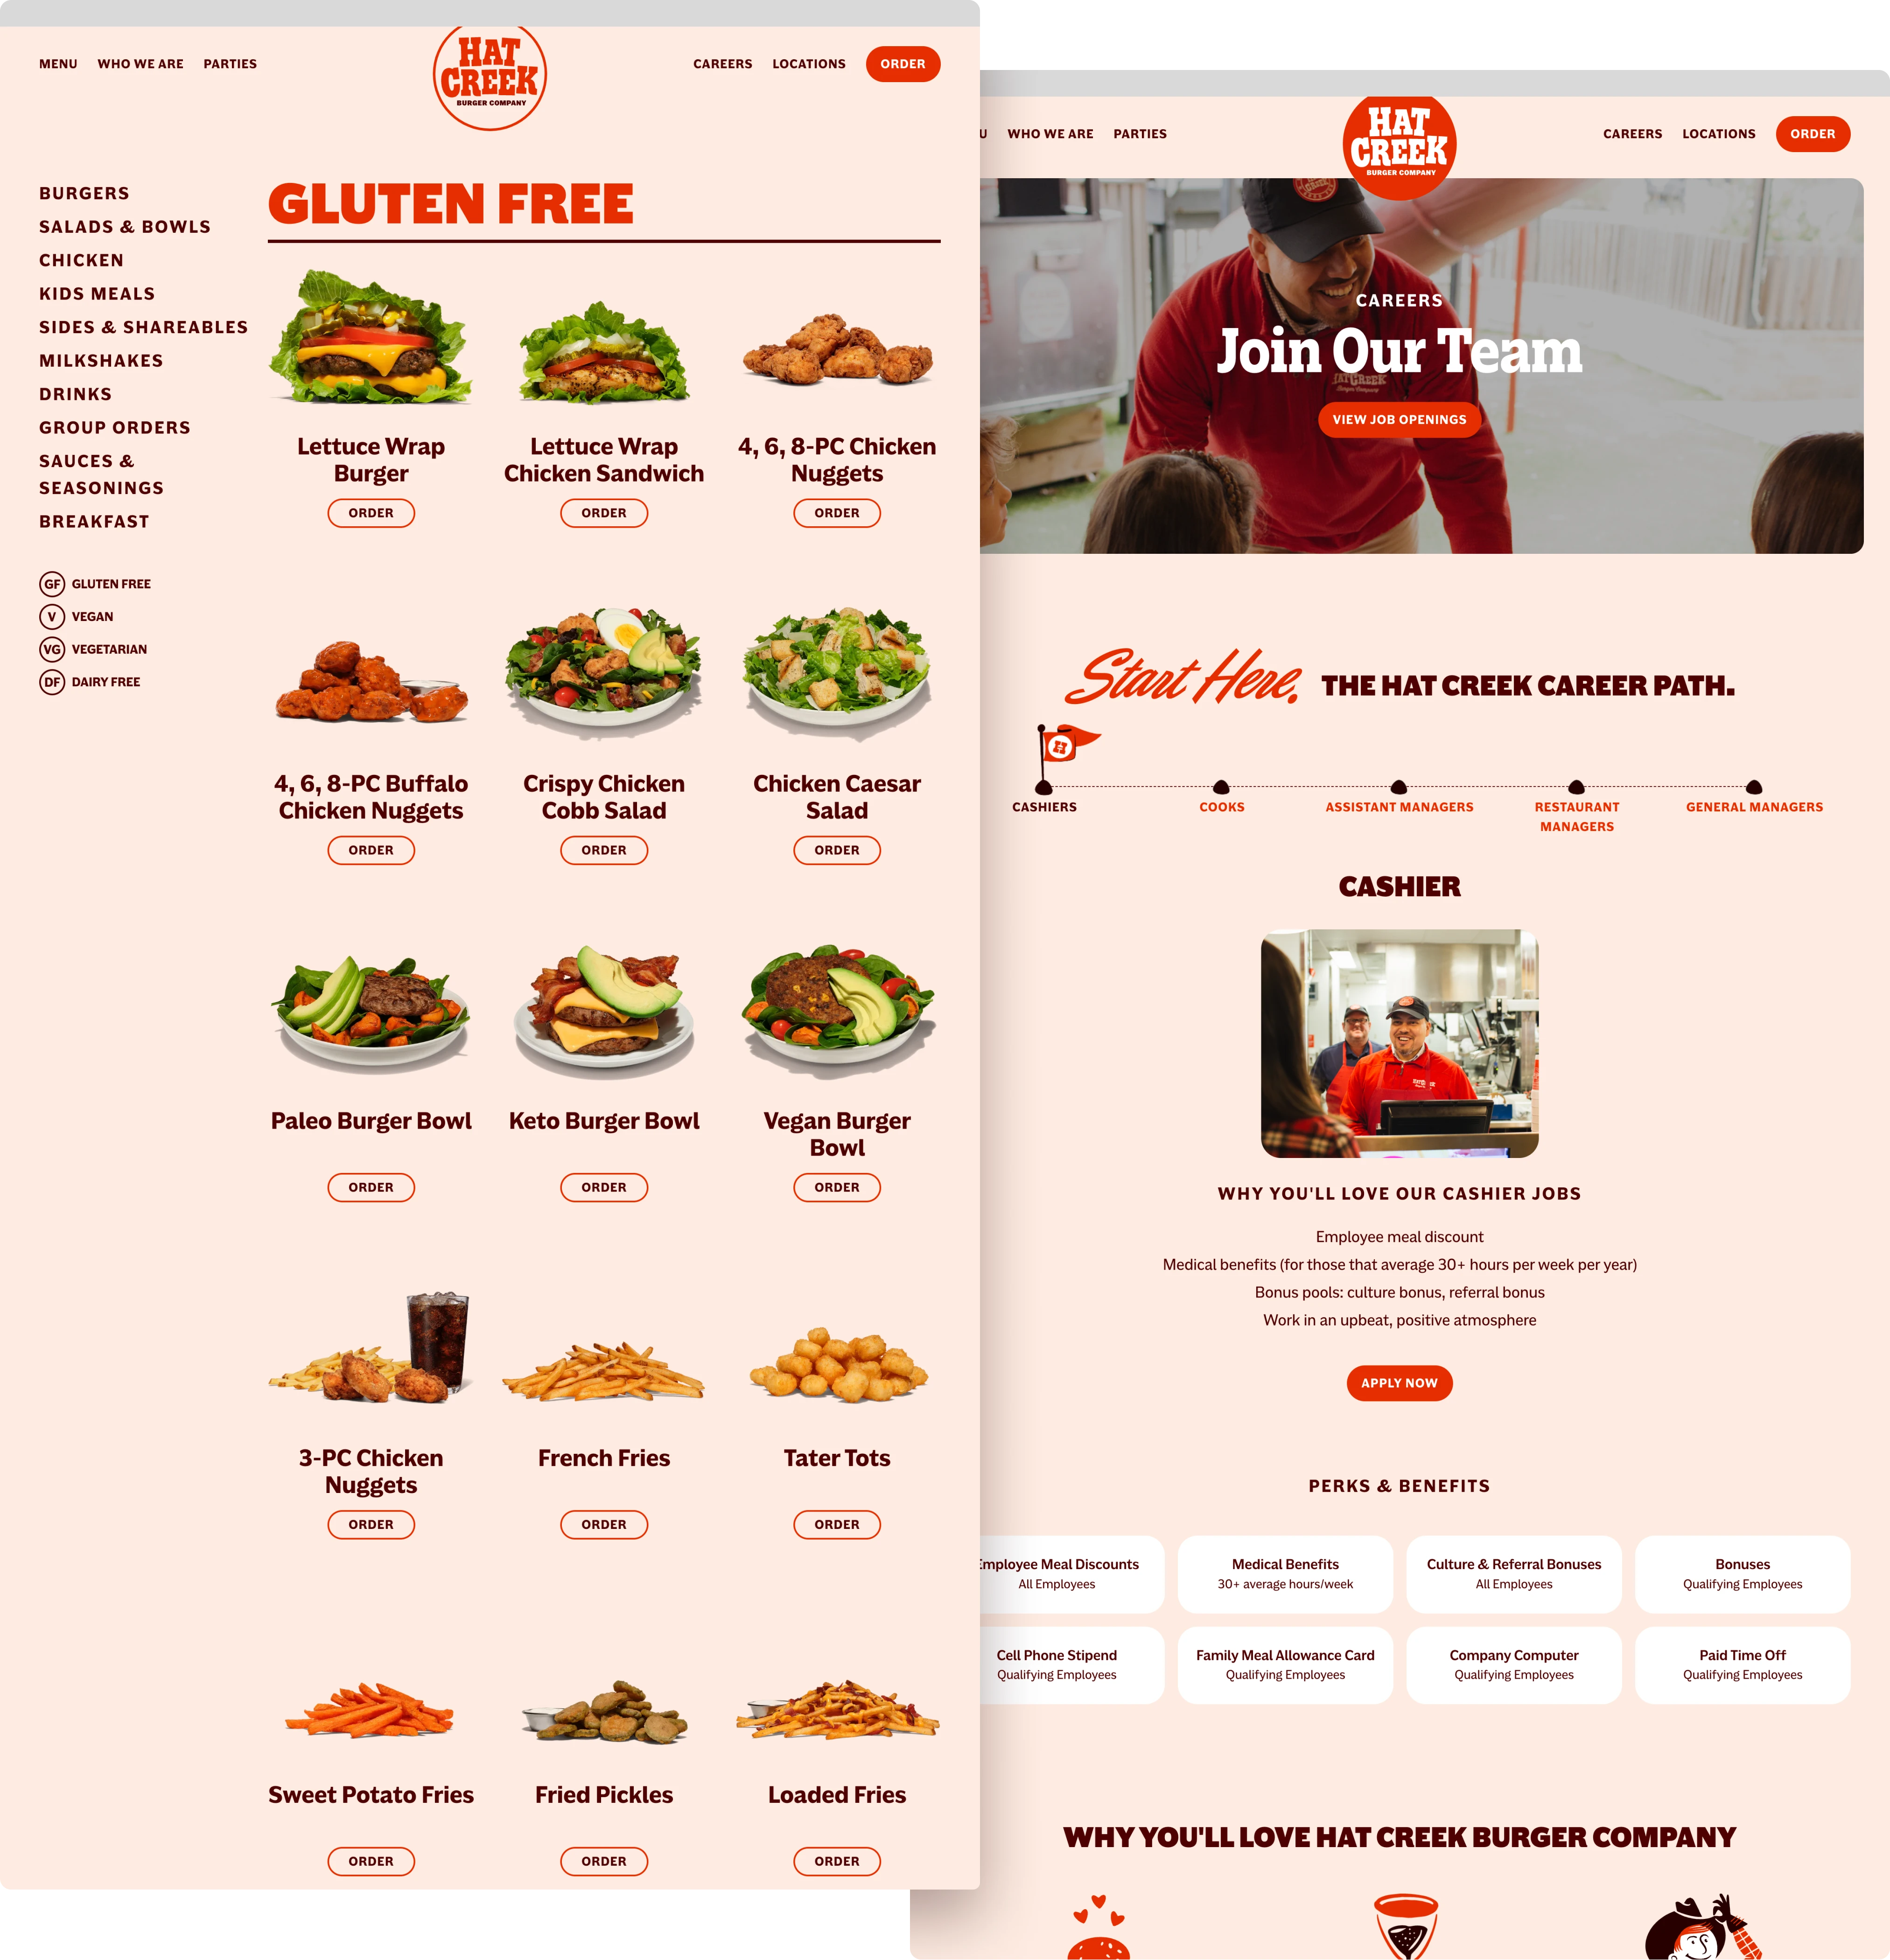 'Gluten free menu' and 'join our team' pages